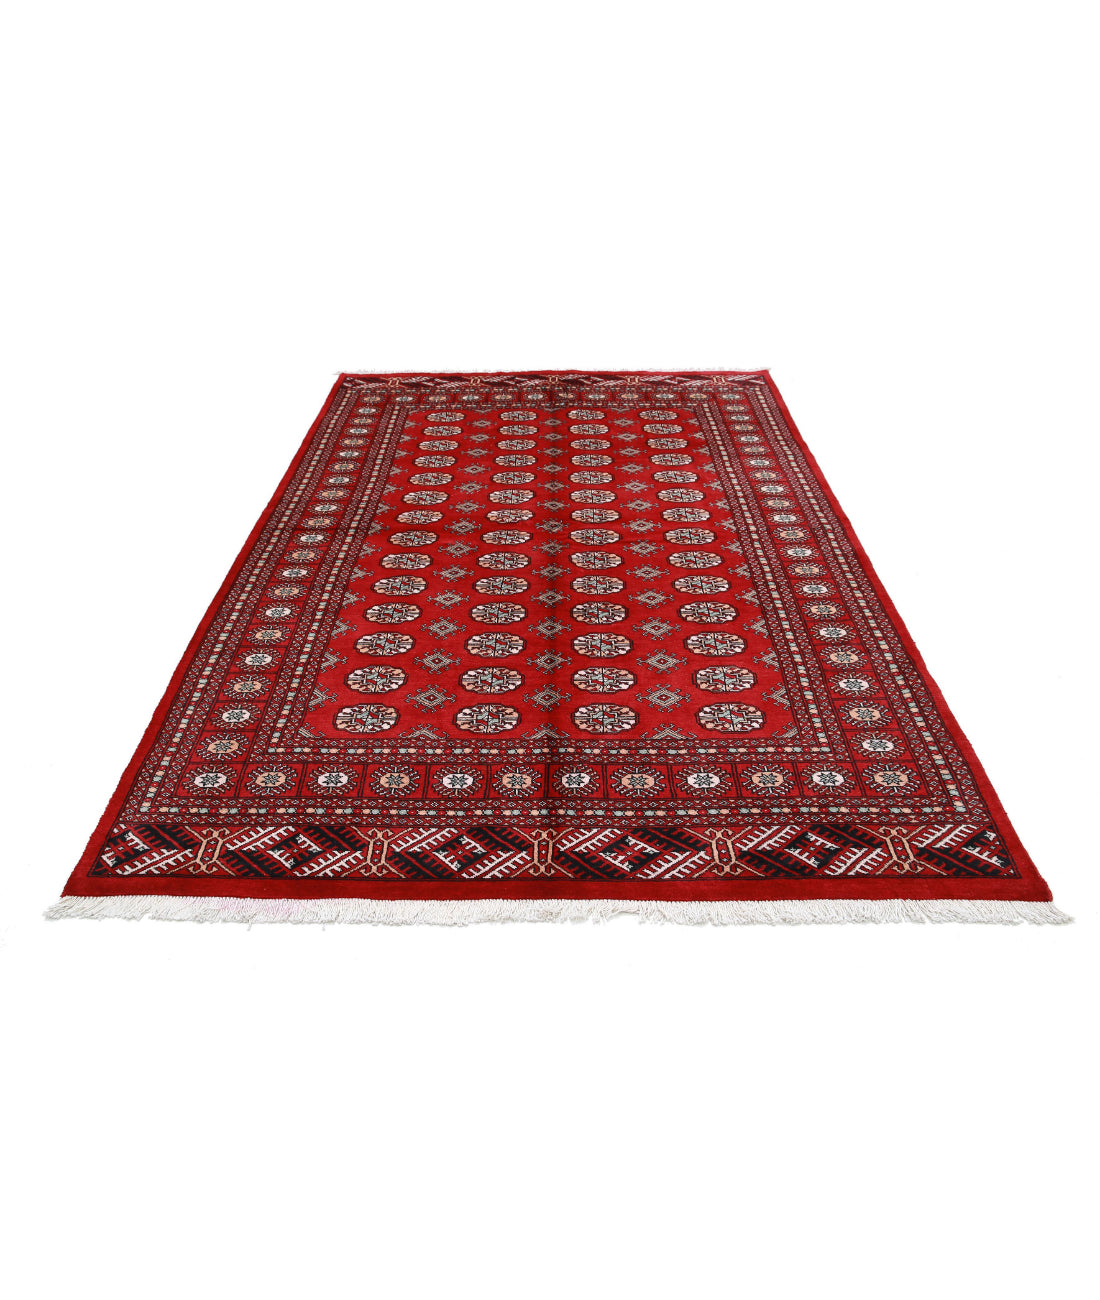 Hand Knotted Tribal Bokhara Wool Rug - 6'2'' x 9'2'' 6'2'' x 9'2'' (185 X 275) / Red / Black